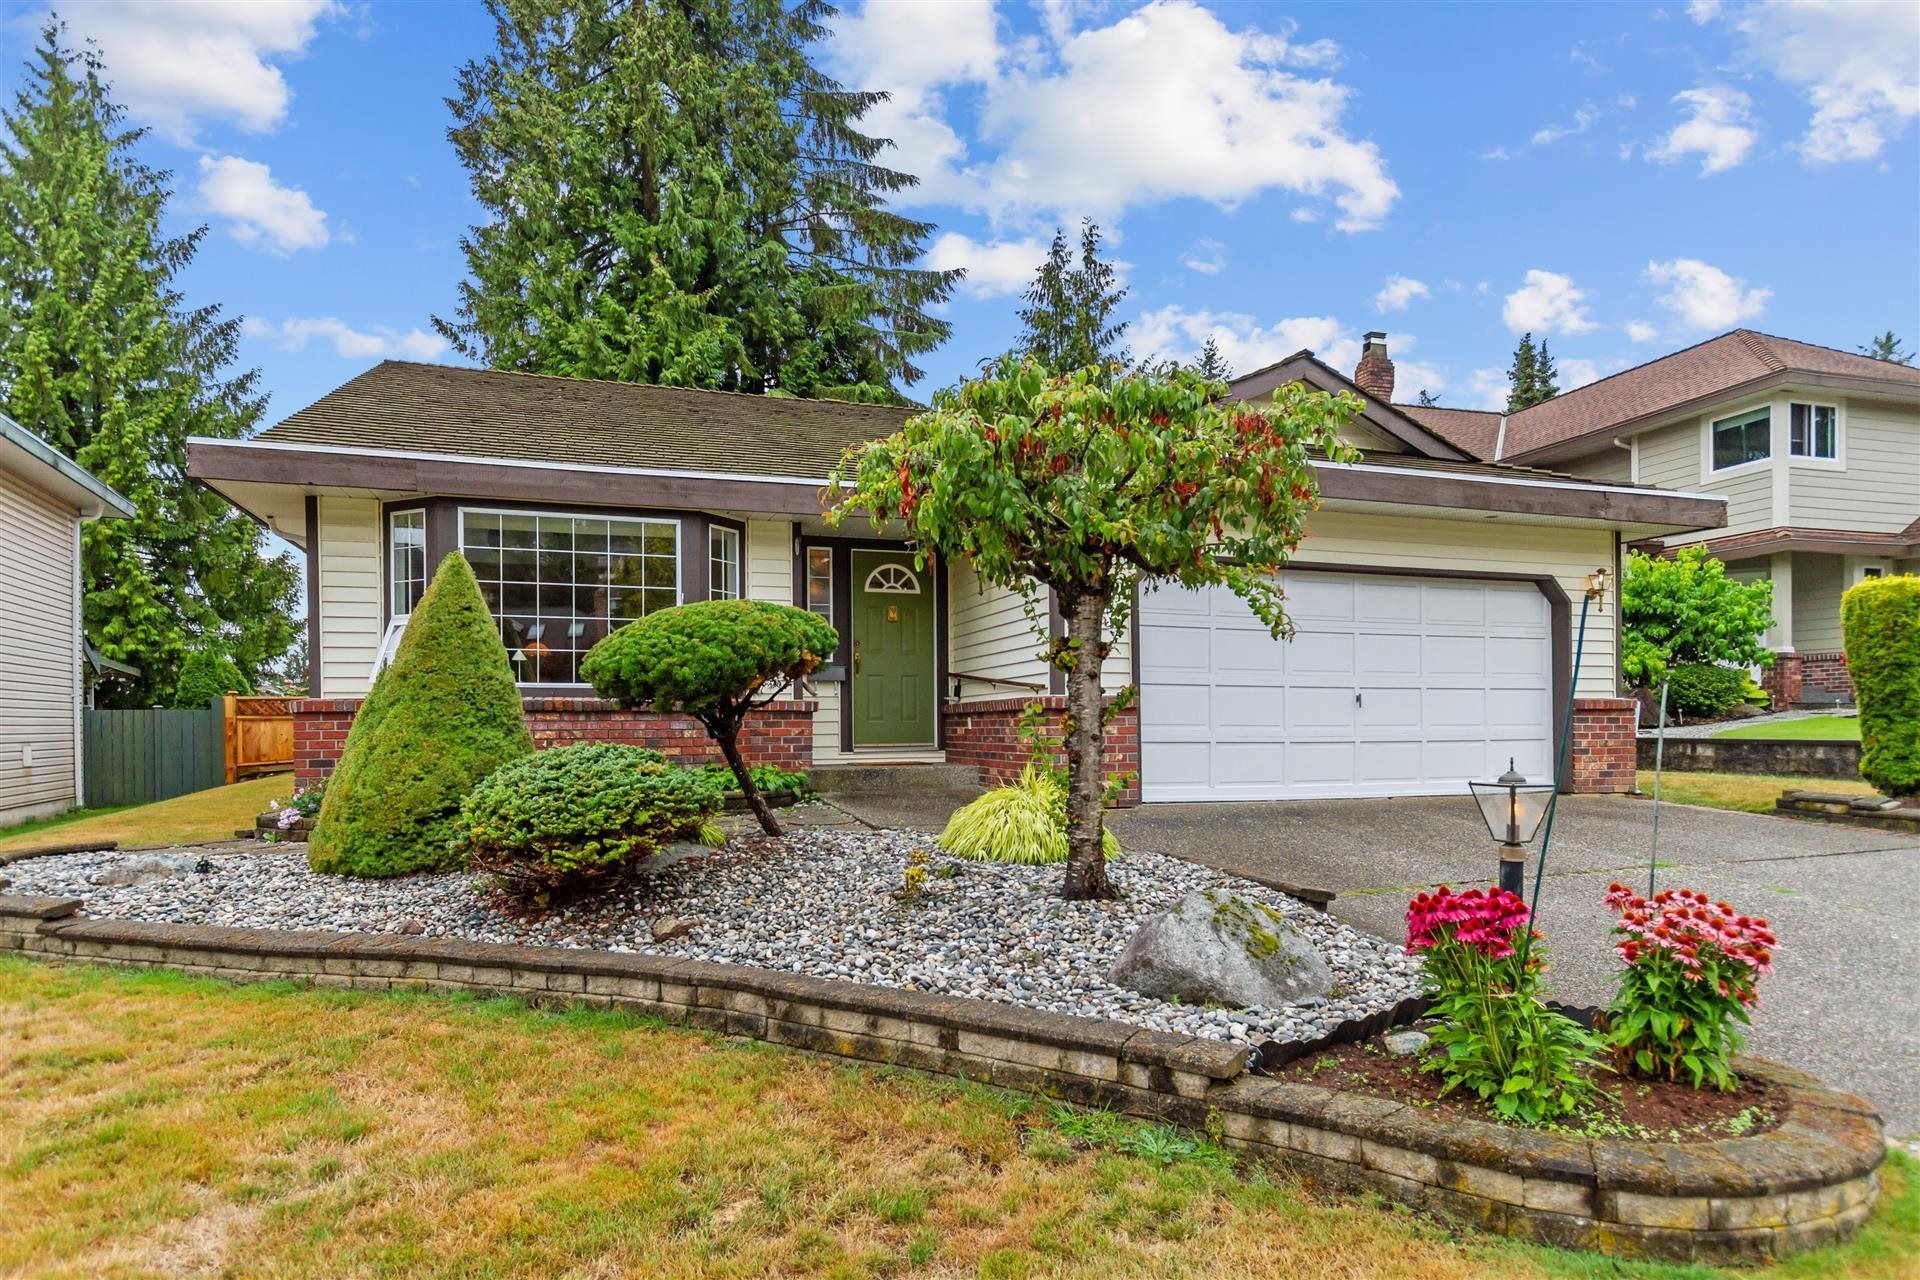 Neighbourhood Real Estate has JUST SOLD ANOTHER property at 15 RAVINE DR in Port Moody 